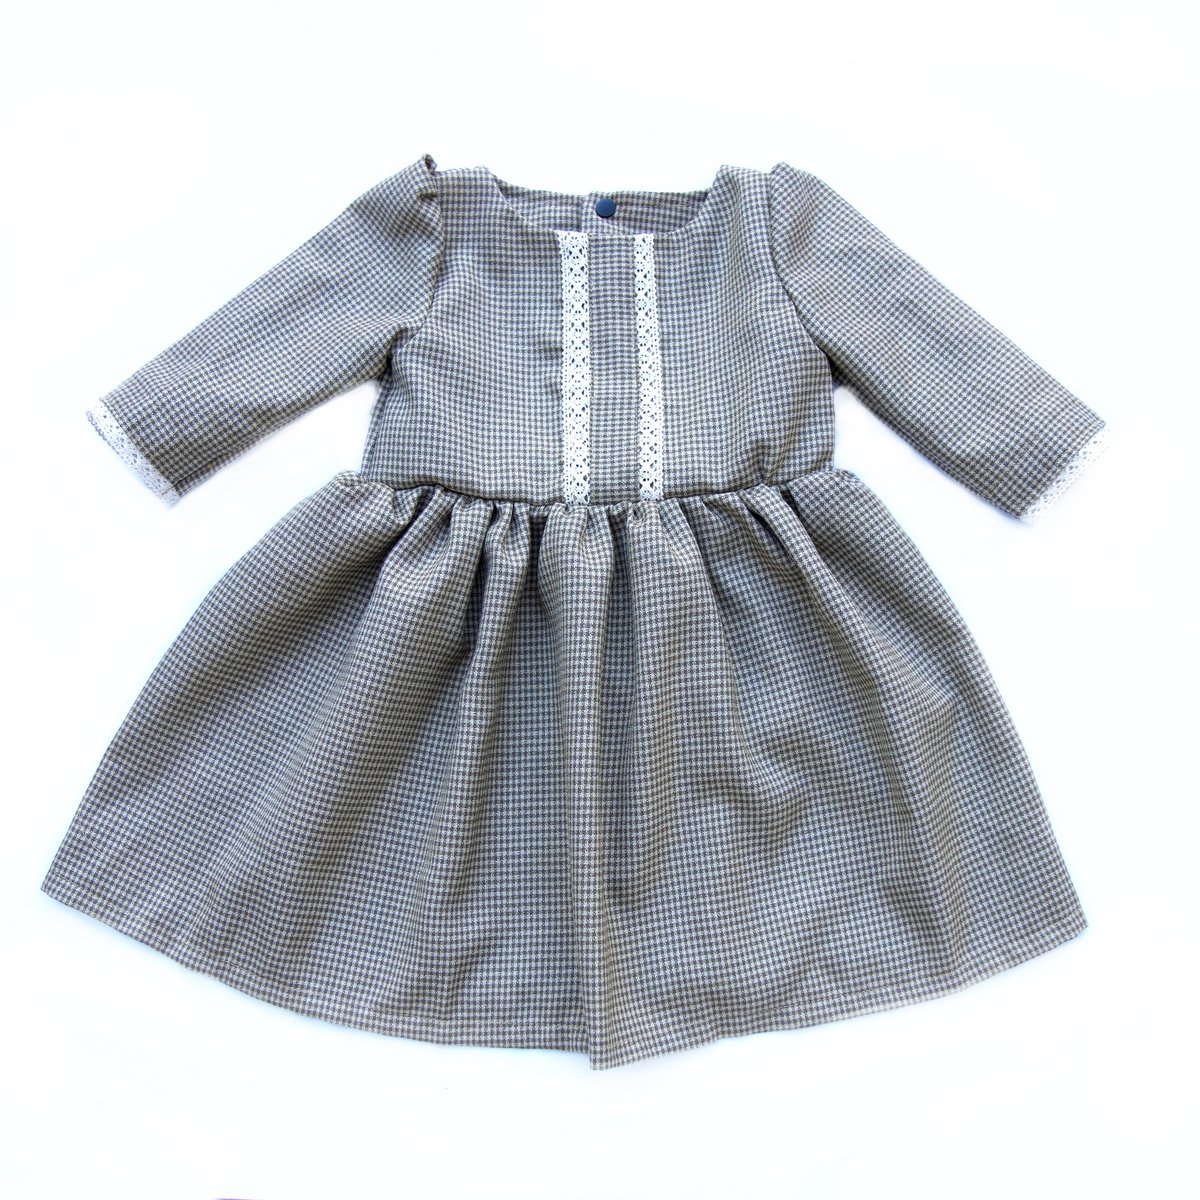 Image of The Anne of Green Gables Dress in Autumn Gingham